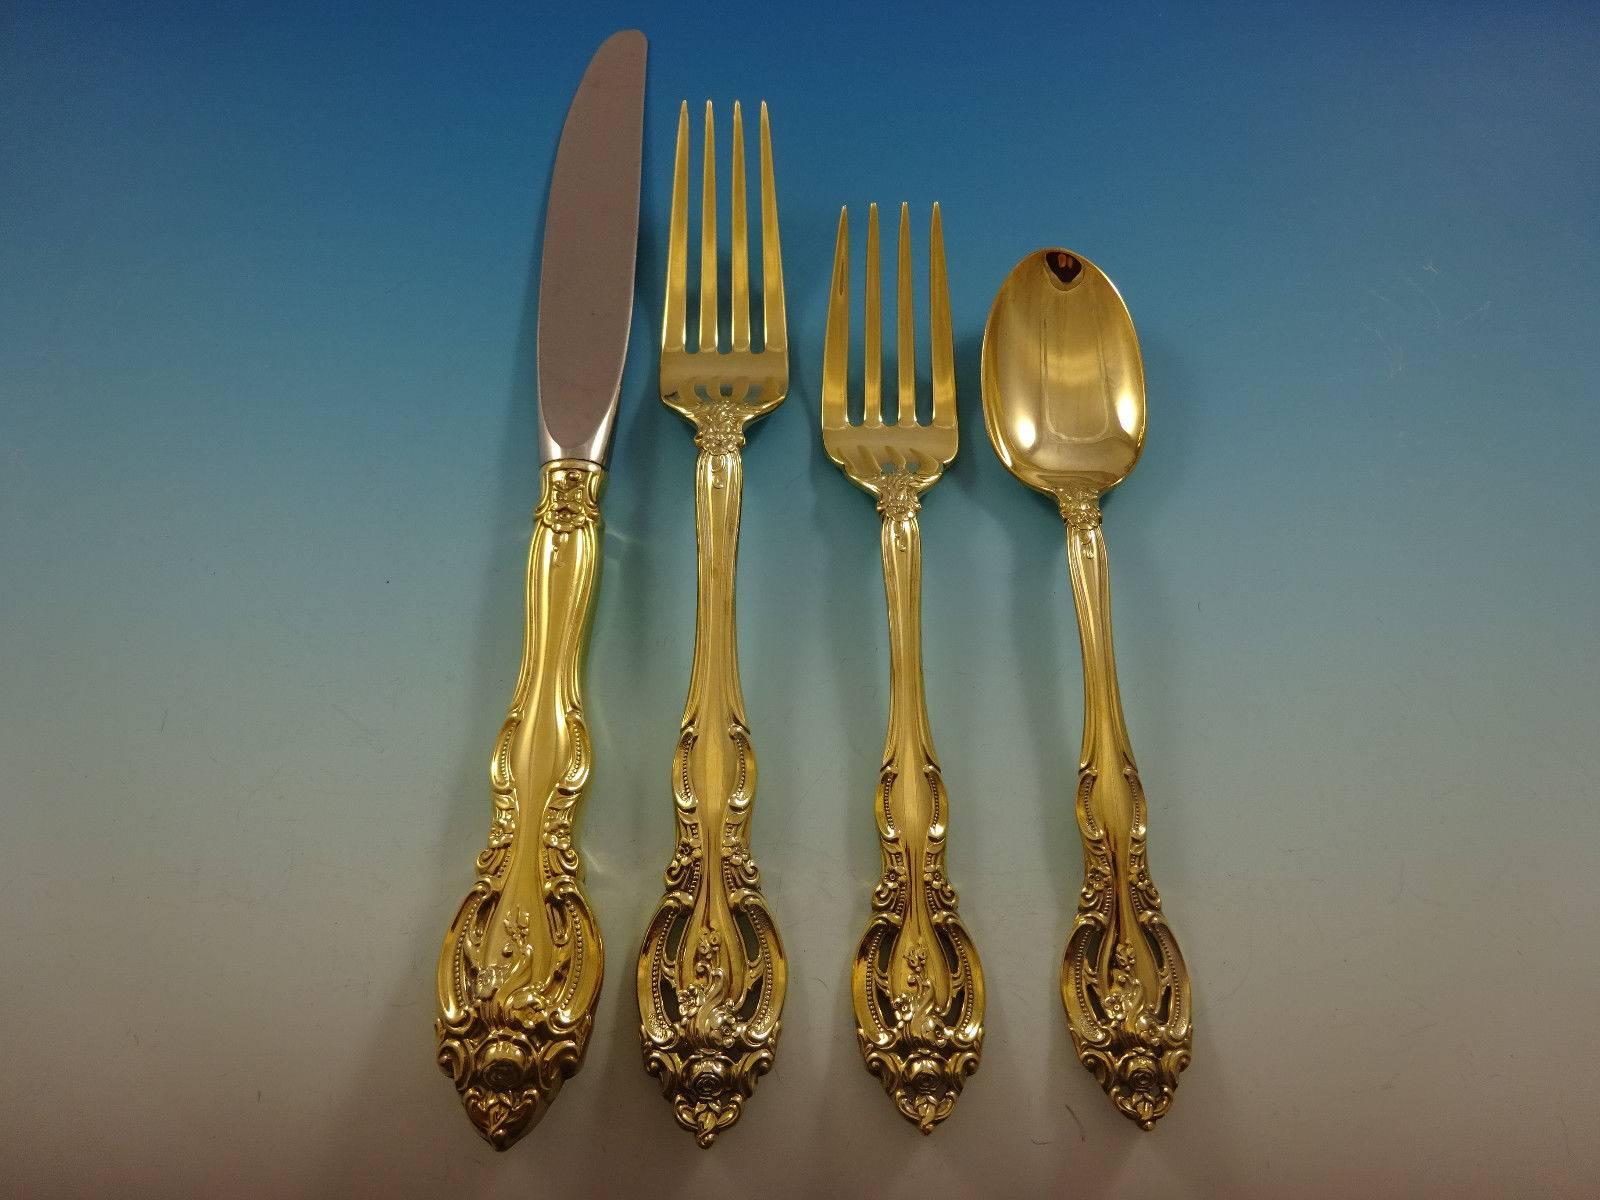 Add some luxe to your life with this fabulous La Scala Gold by Gorham Sterling Silver flatware set 32 pieces. Gold flatware is on trend and makes a bold statement on your table. 

This set is vermeil (completely gold-washed) and includes:
 
Eight